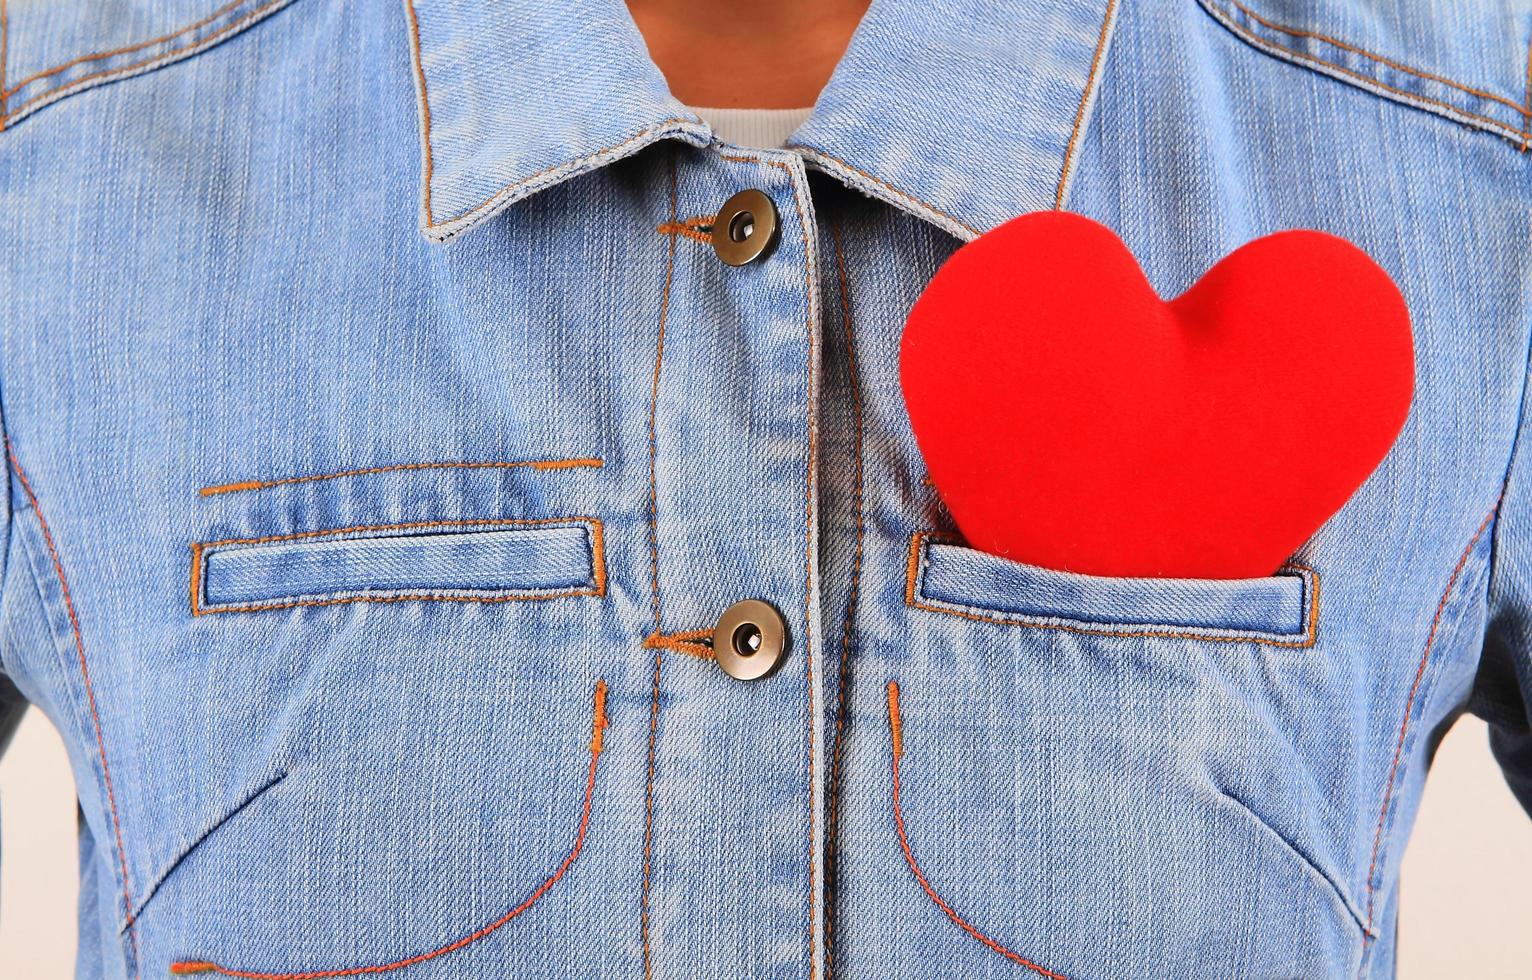 Red heart sticking out of blue jeans back pocket photo